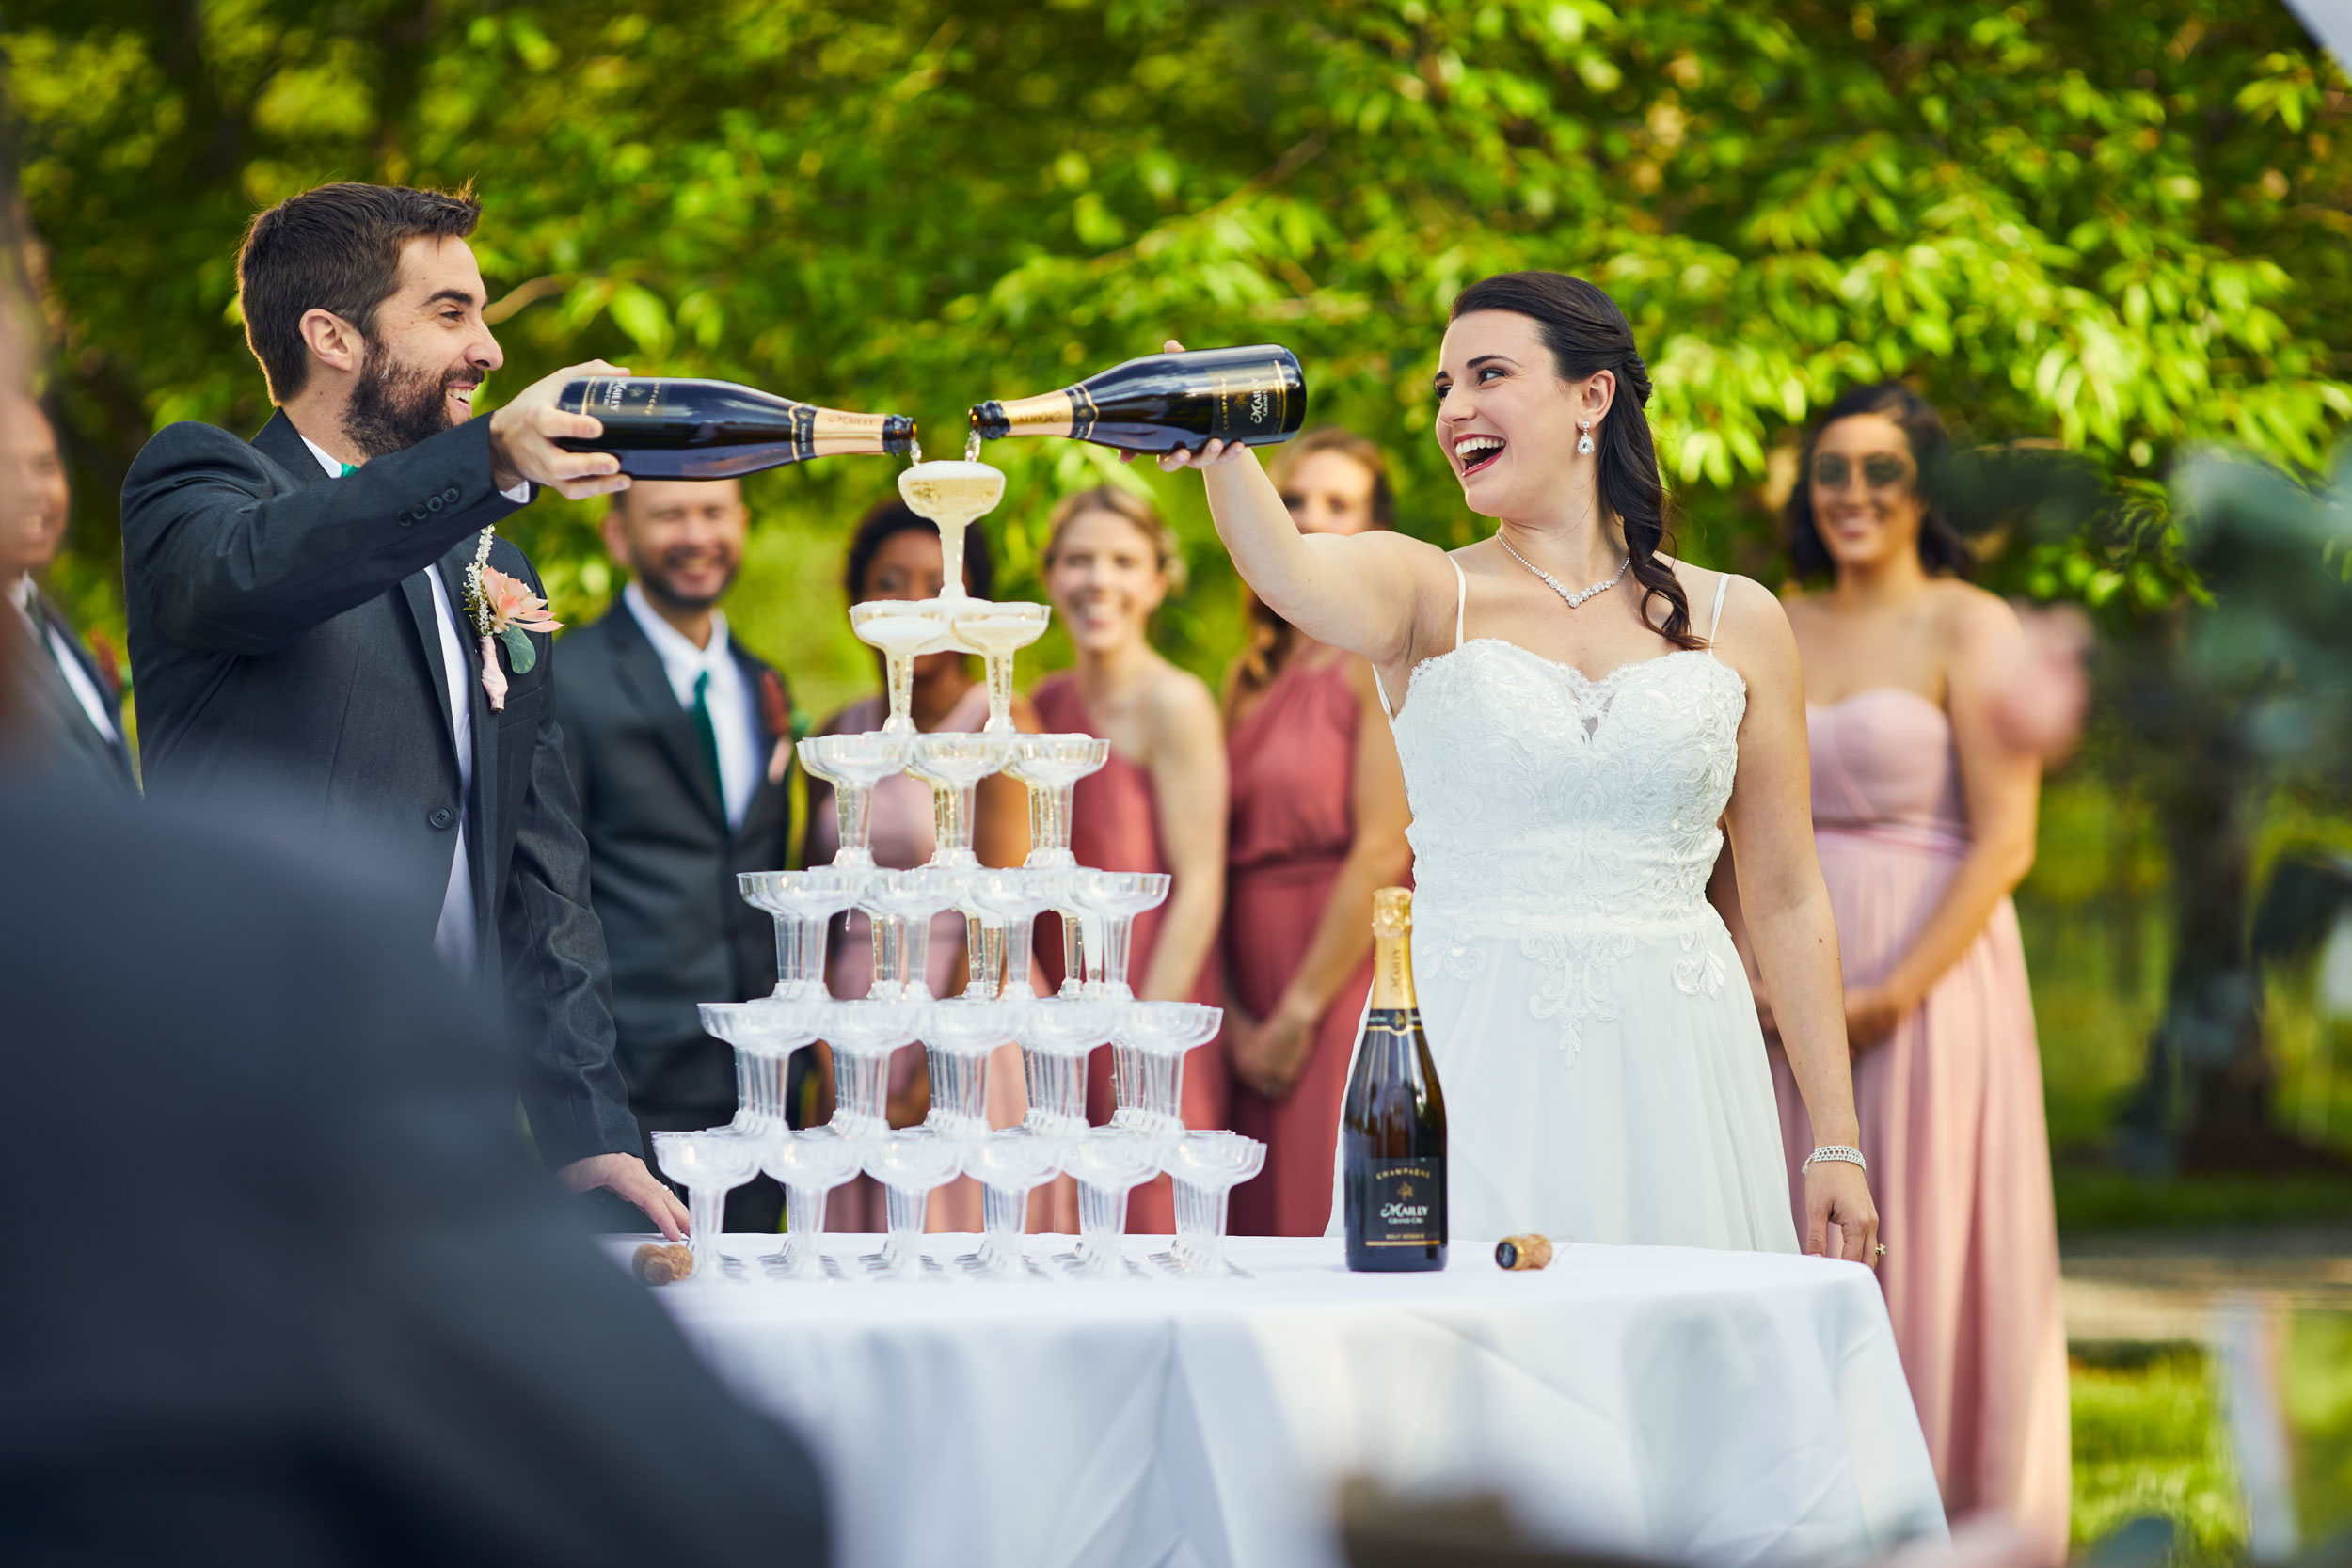 married-couple-pouring-champagne-dc-commercial-photographer-eli-meir-kaplan